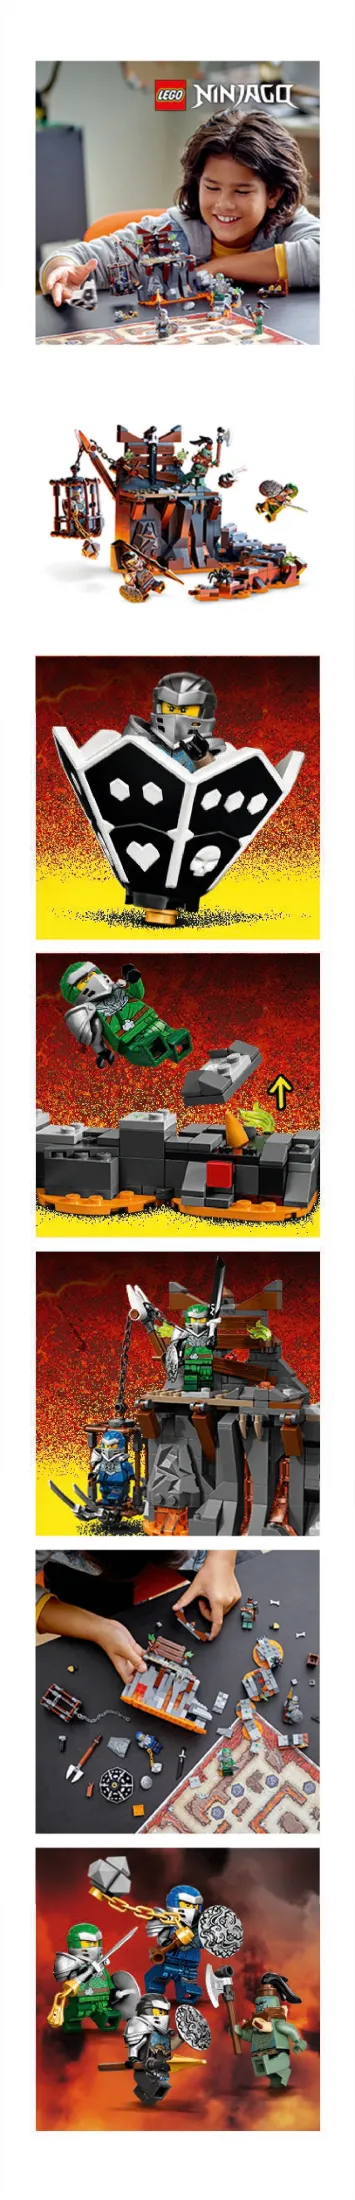 Lego Ninjago Journey To The Skull Dungeons 401 Pieces Lazada Singapore